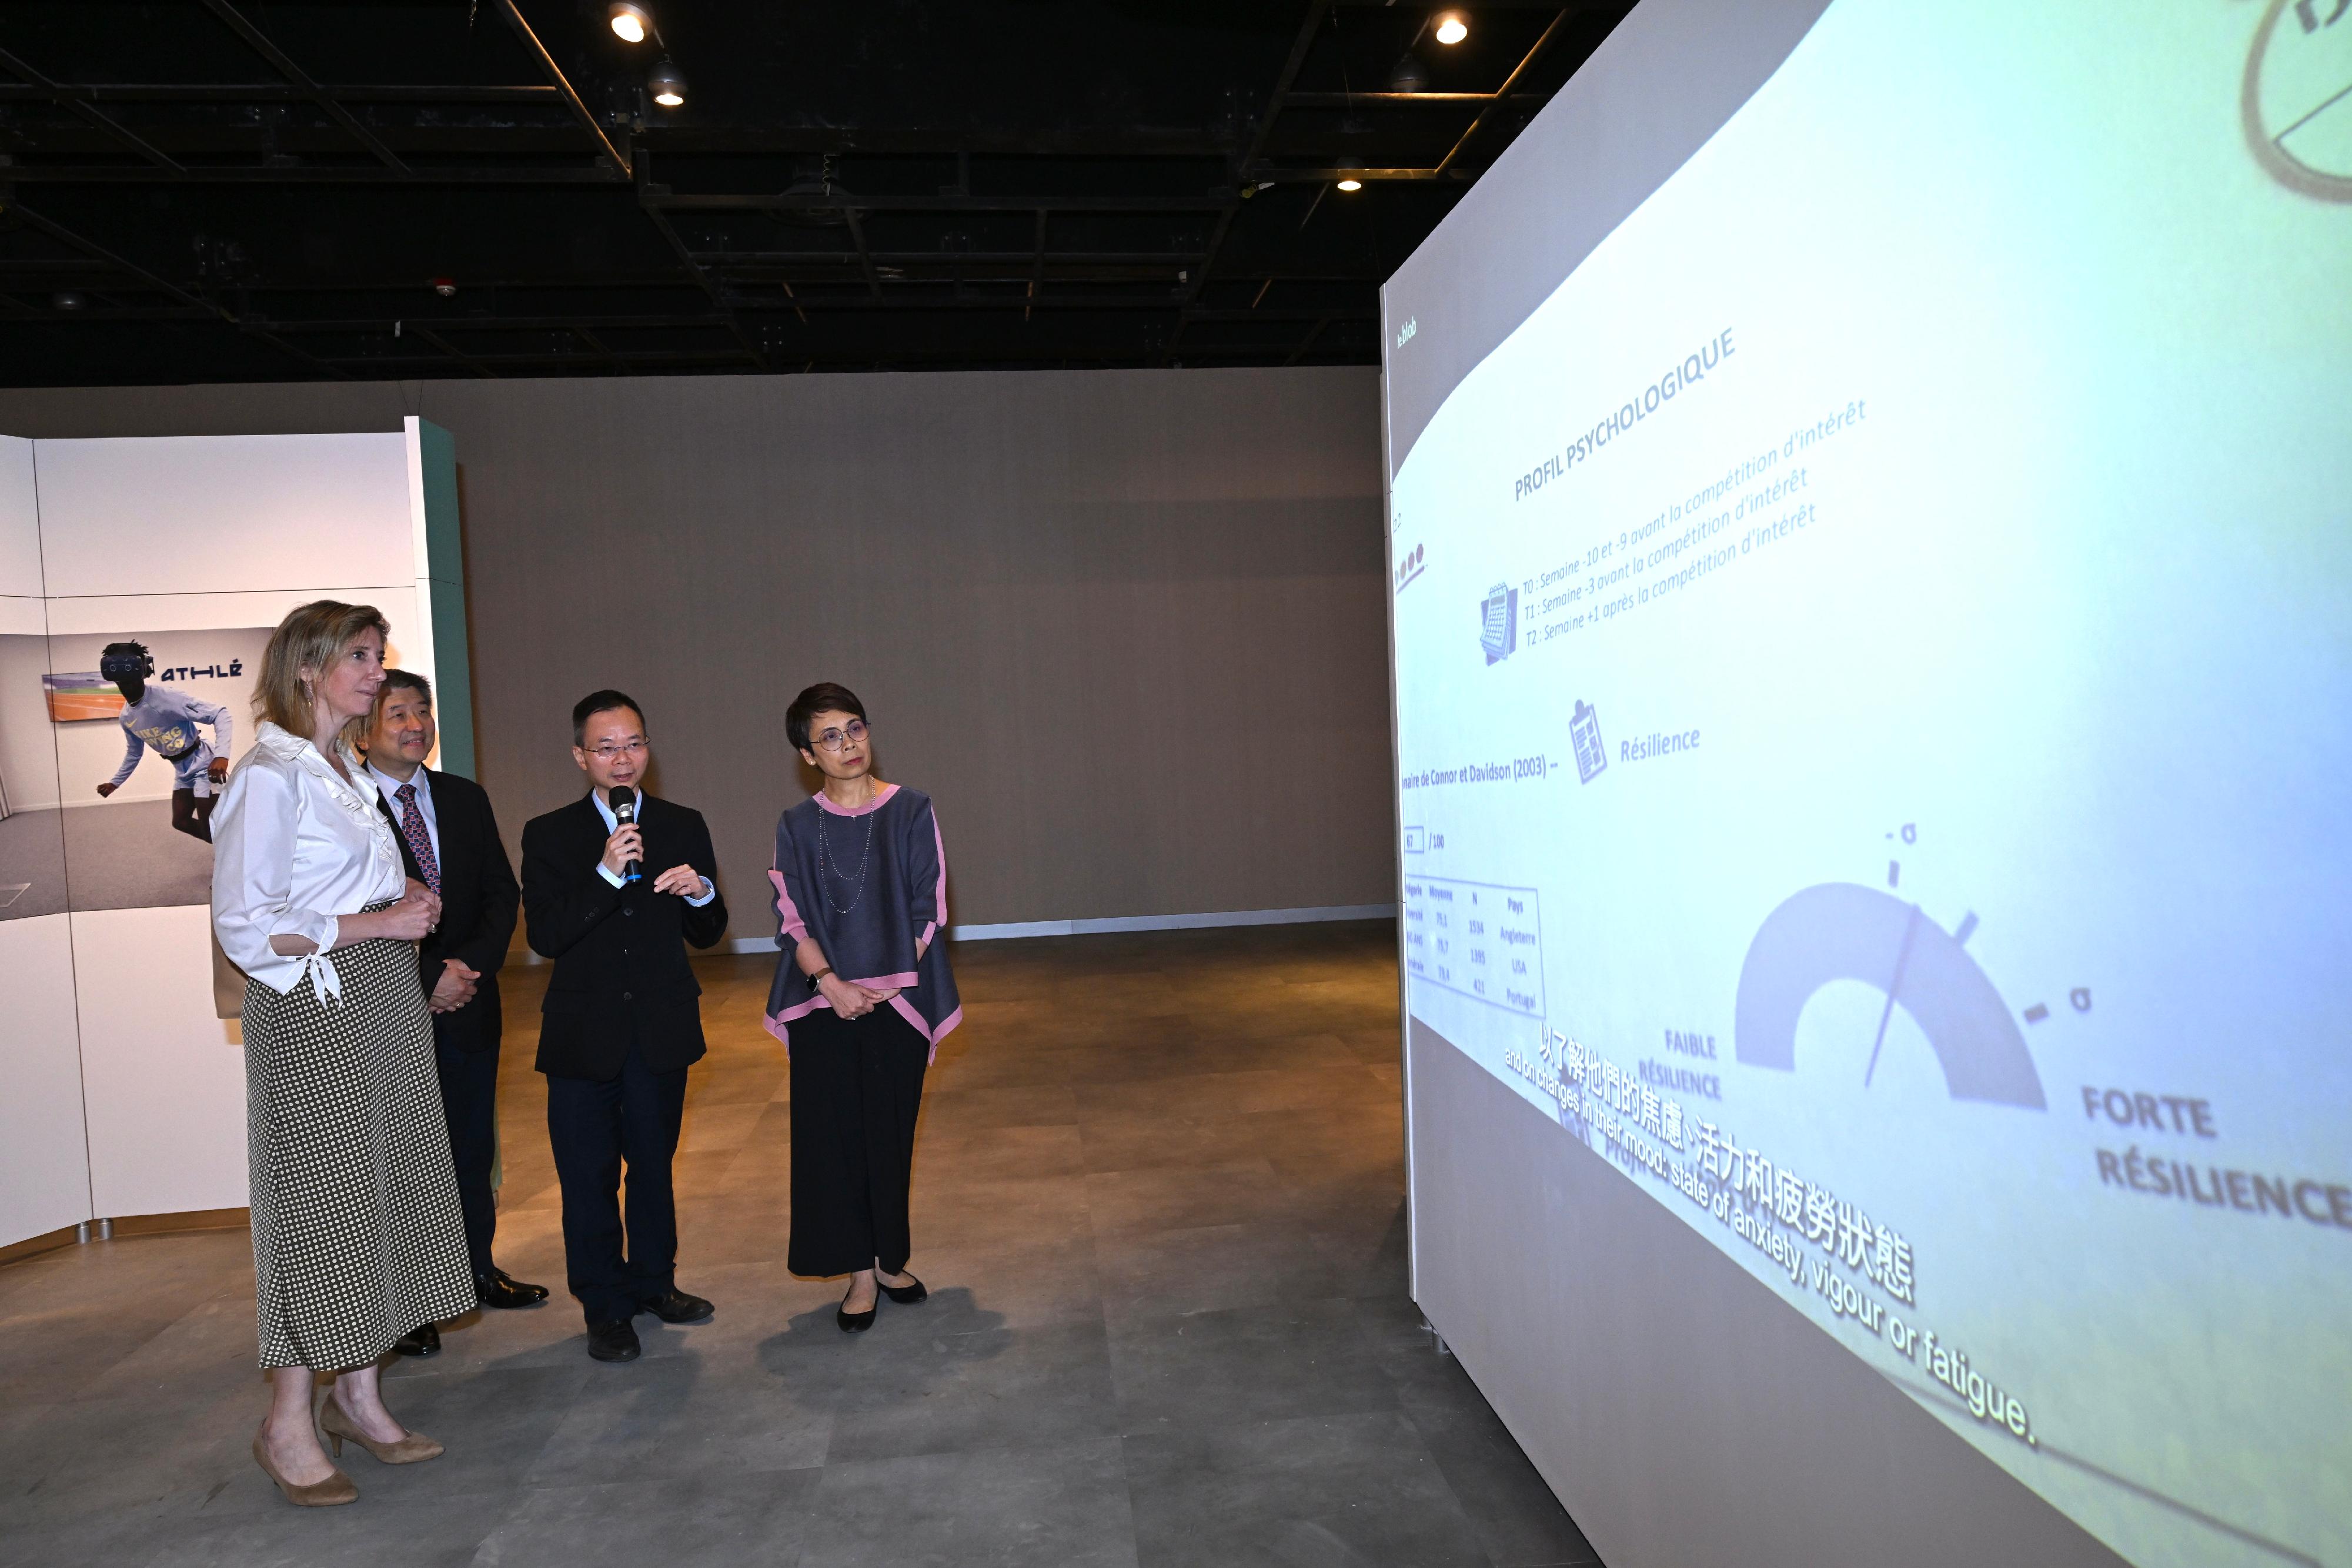 The opening ceremony for the French Science Festival "Science at the Service of Medals" exhibition was held today (November 9) at the Hong Kong Science Museum (HKScM). Photo shows the Curator of the HKScM (Science Promotion Unit), Mr Samuel Chui (second right), introducing the exhibition to officiating guests the Consul General of France in Hong Kong and Macau, Mrs Christile Drulhe (first left); the Museum Director of the HKScM, Mr Lawrence Lee (second left); and the Deputy Director of Leisure and Cultural Services (Culture), Miss Eve Tam (first right).

